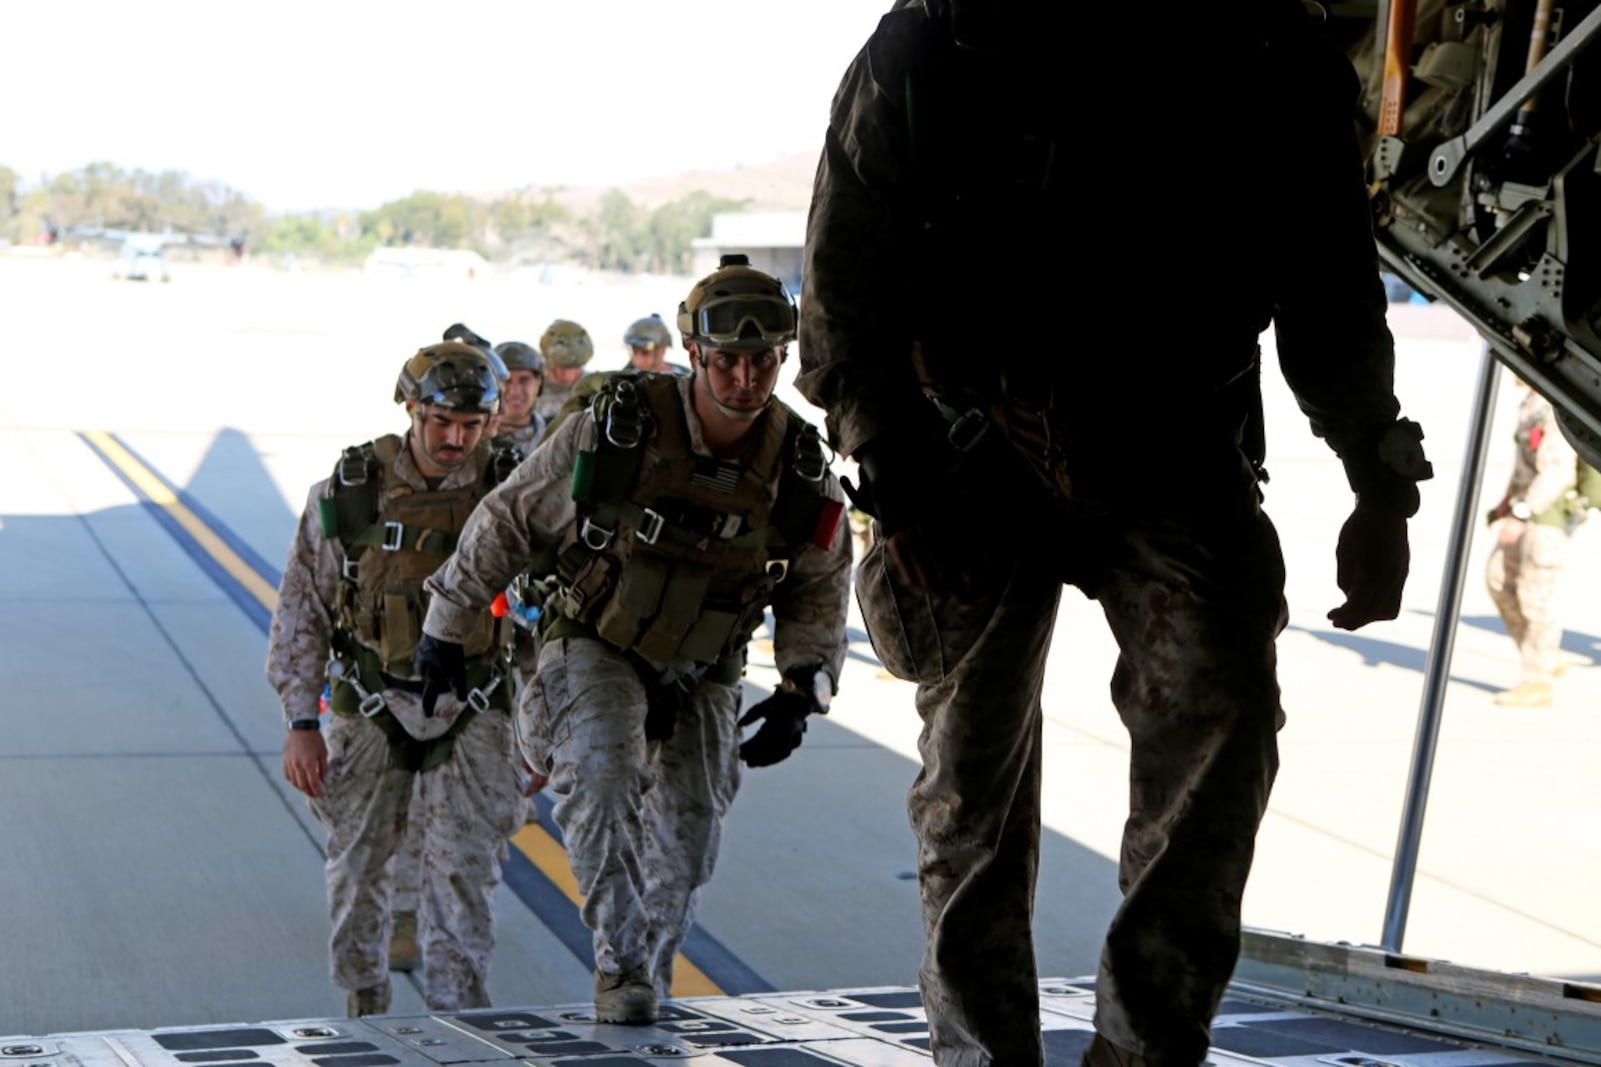 Marines with 1st Reconnaissance Battalion, 1st Marine Division enter a C-130 Hercules with 3rd Marine Aircraft Wing before executing static-line parachute operations and free fall jump training aboard Marine Corps Base Camp Pendleton, Calif., Oct. 16, 2015. 1st Recon conducted parachute operations in preparation for future deployments. (U.S. Marine Corps photo by Cpl. Demetrius Morgan/RELEASED)